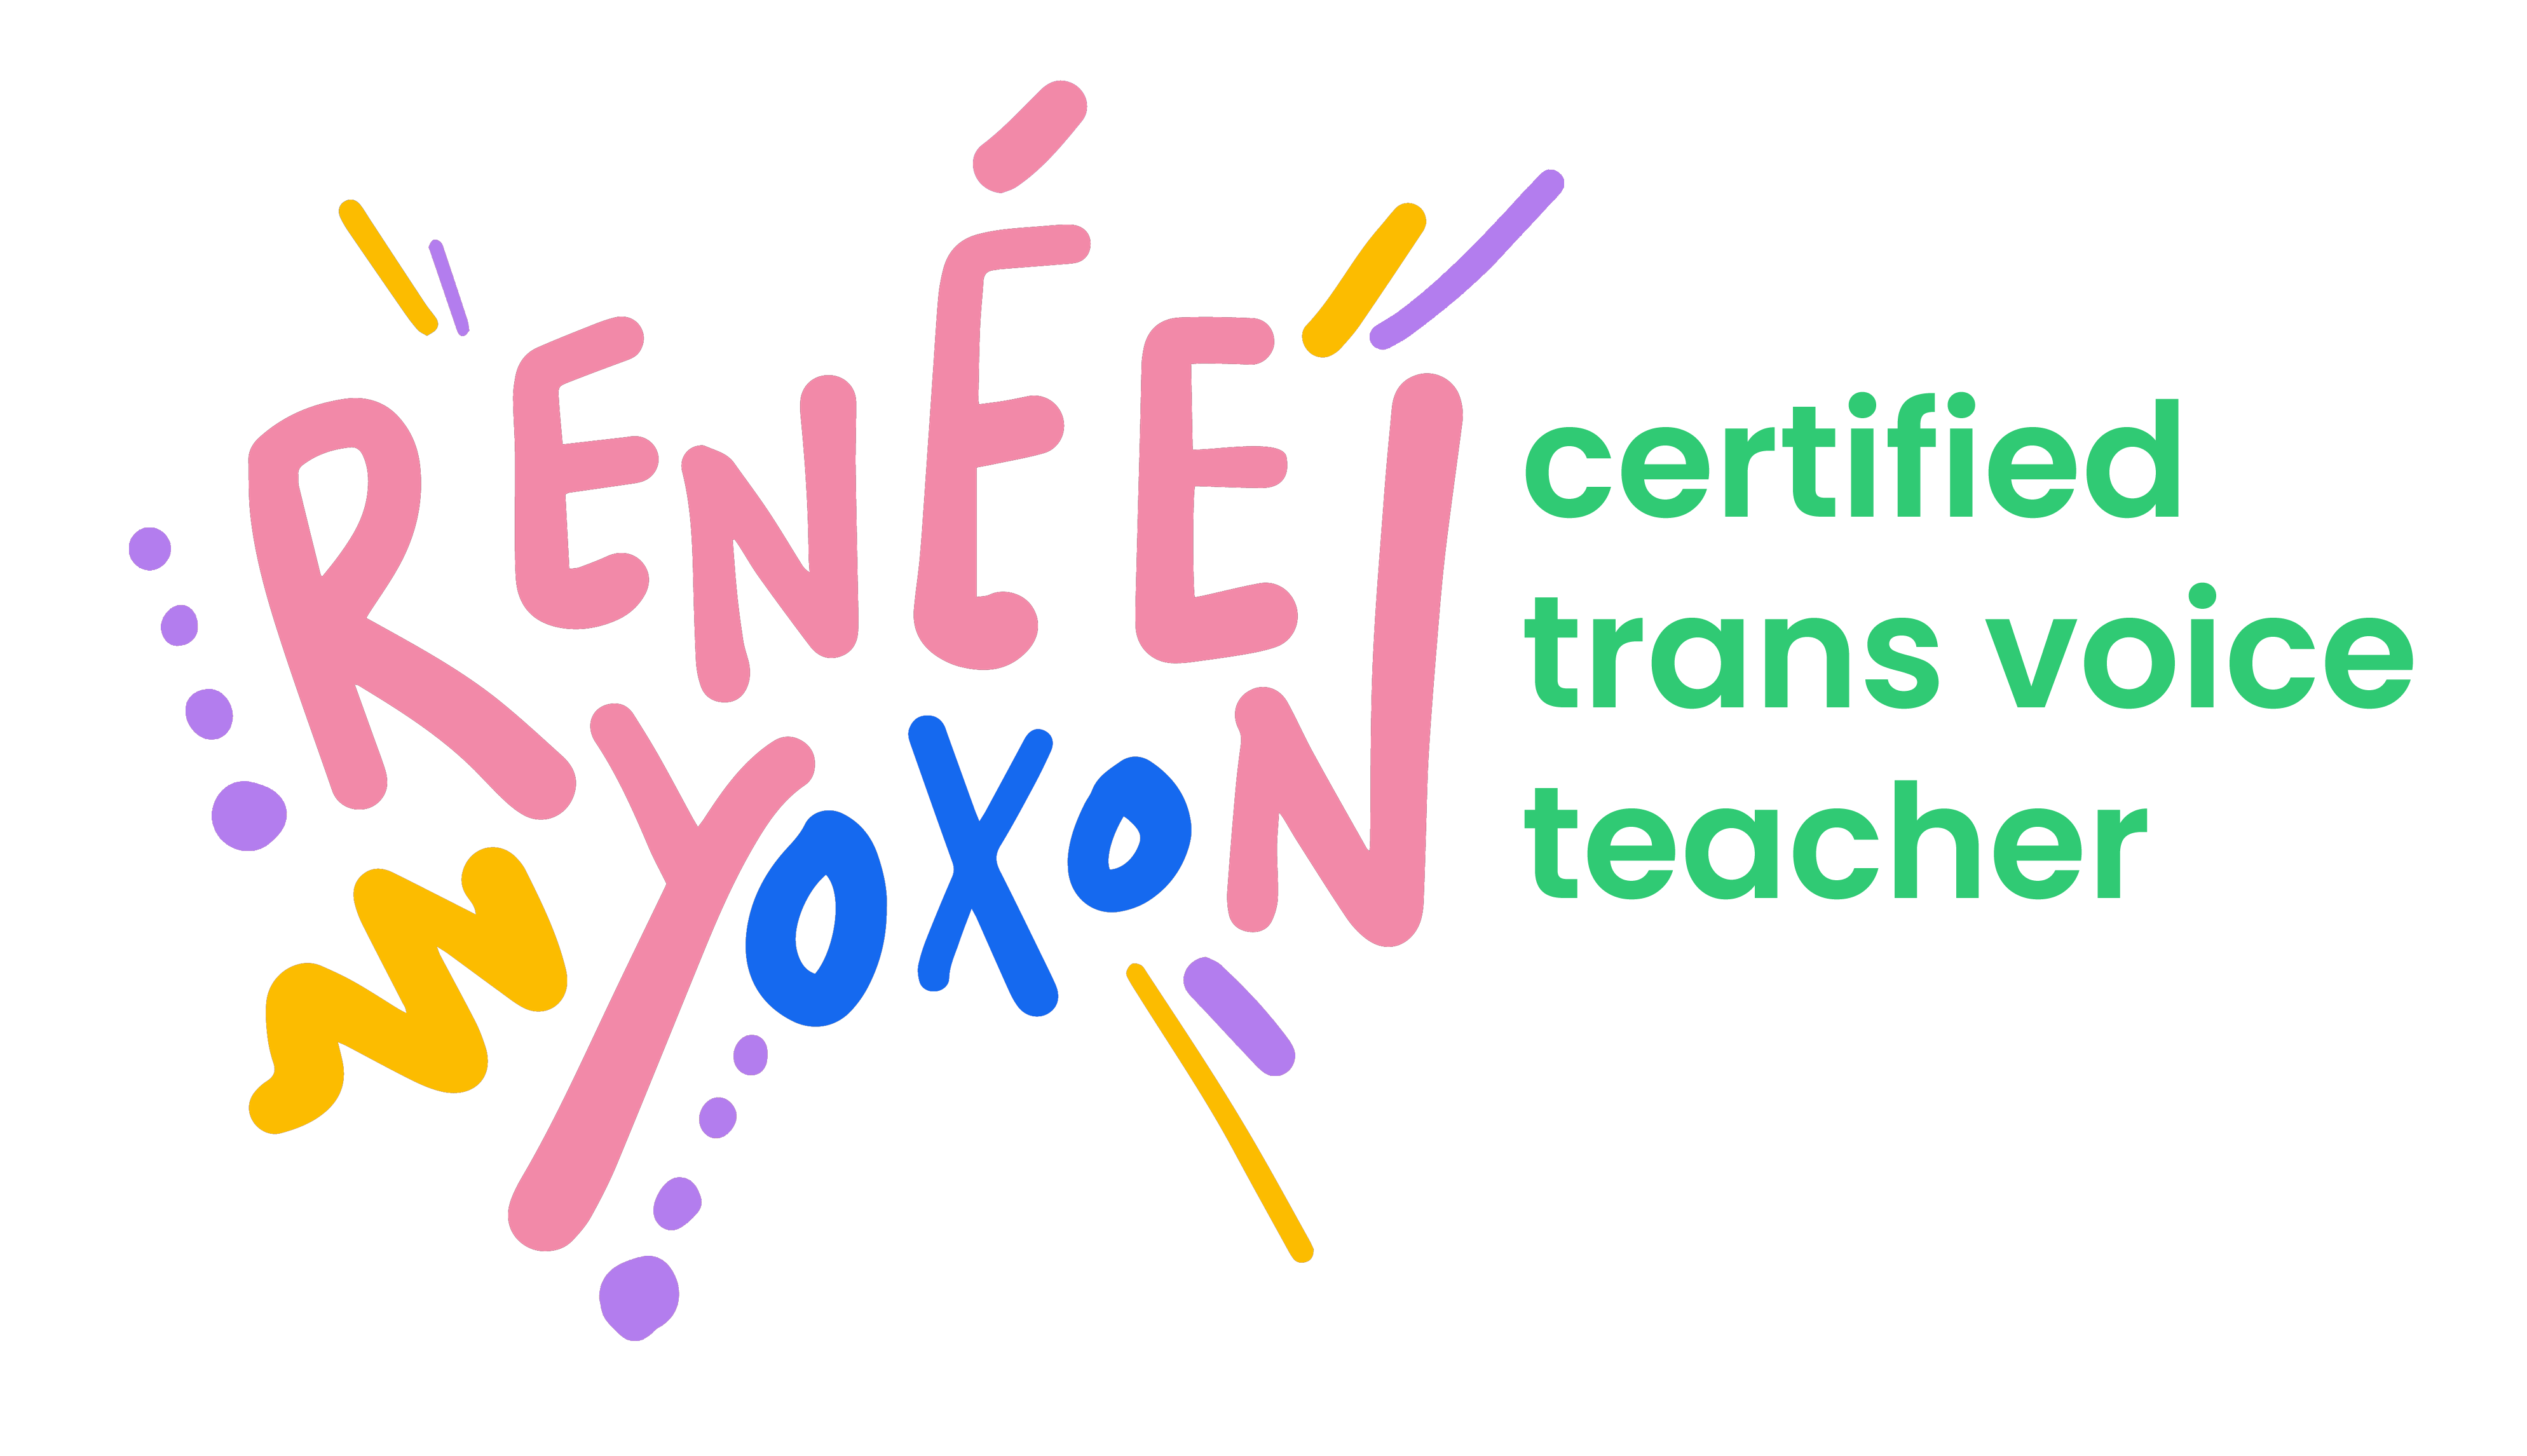 Multi coloured graphic that read Renée Yoxon certified trans voice teacher. Renée is written in pink, Yoxon is in pink and the letters OXO are in bright blue. Certified trans voice teacher is in bright green.